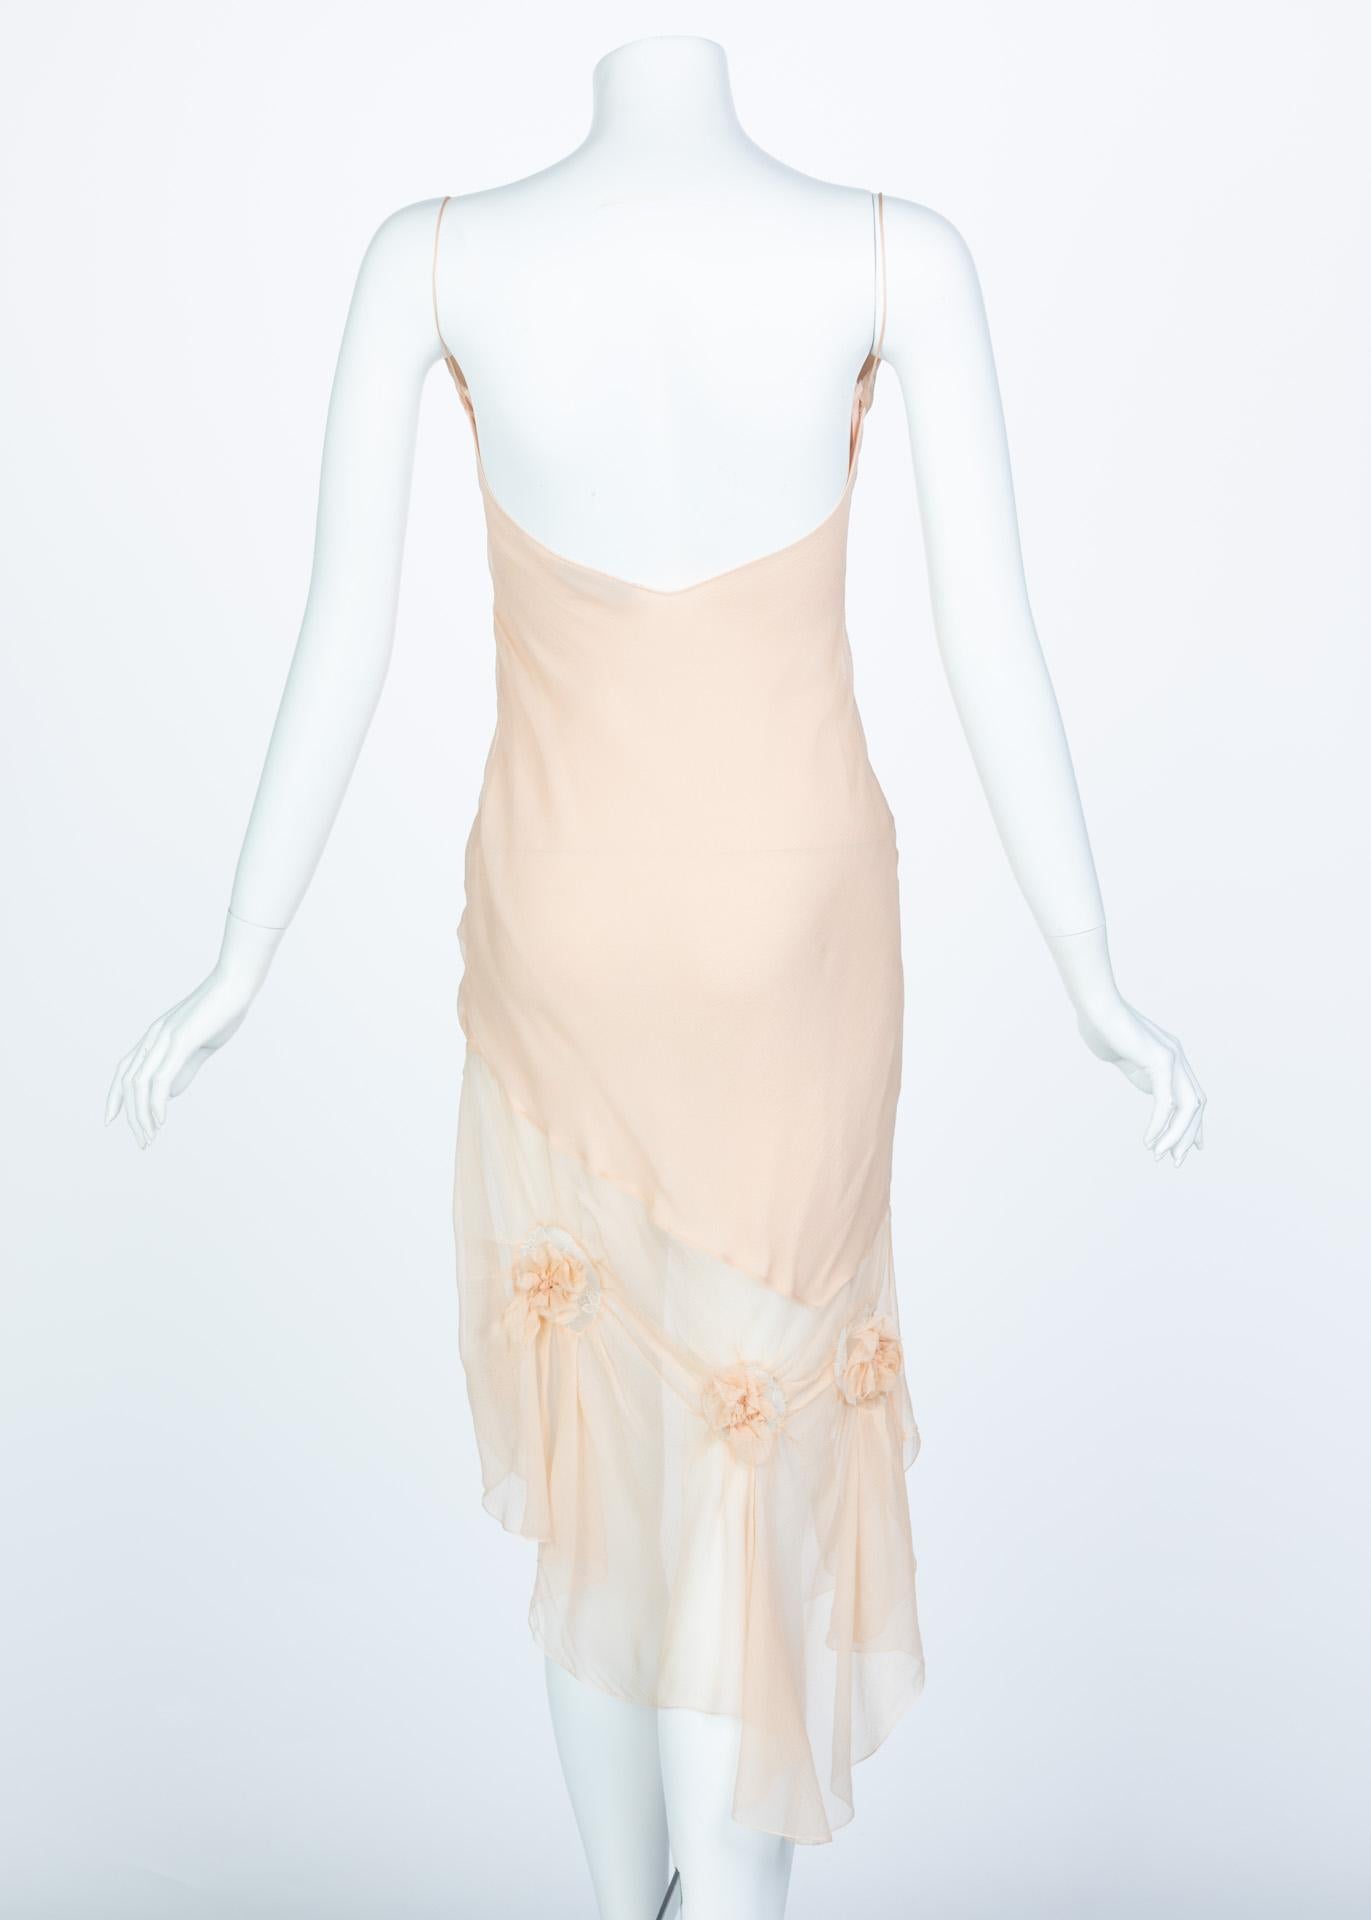 Christian Dior by Galliano Light  Pink Silk Slip Dress, 1990s In Excellent Condition In Boca Raton, FL